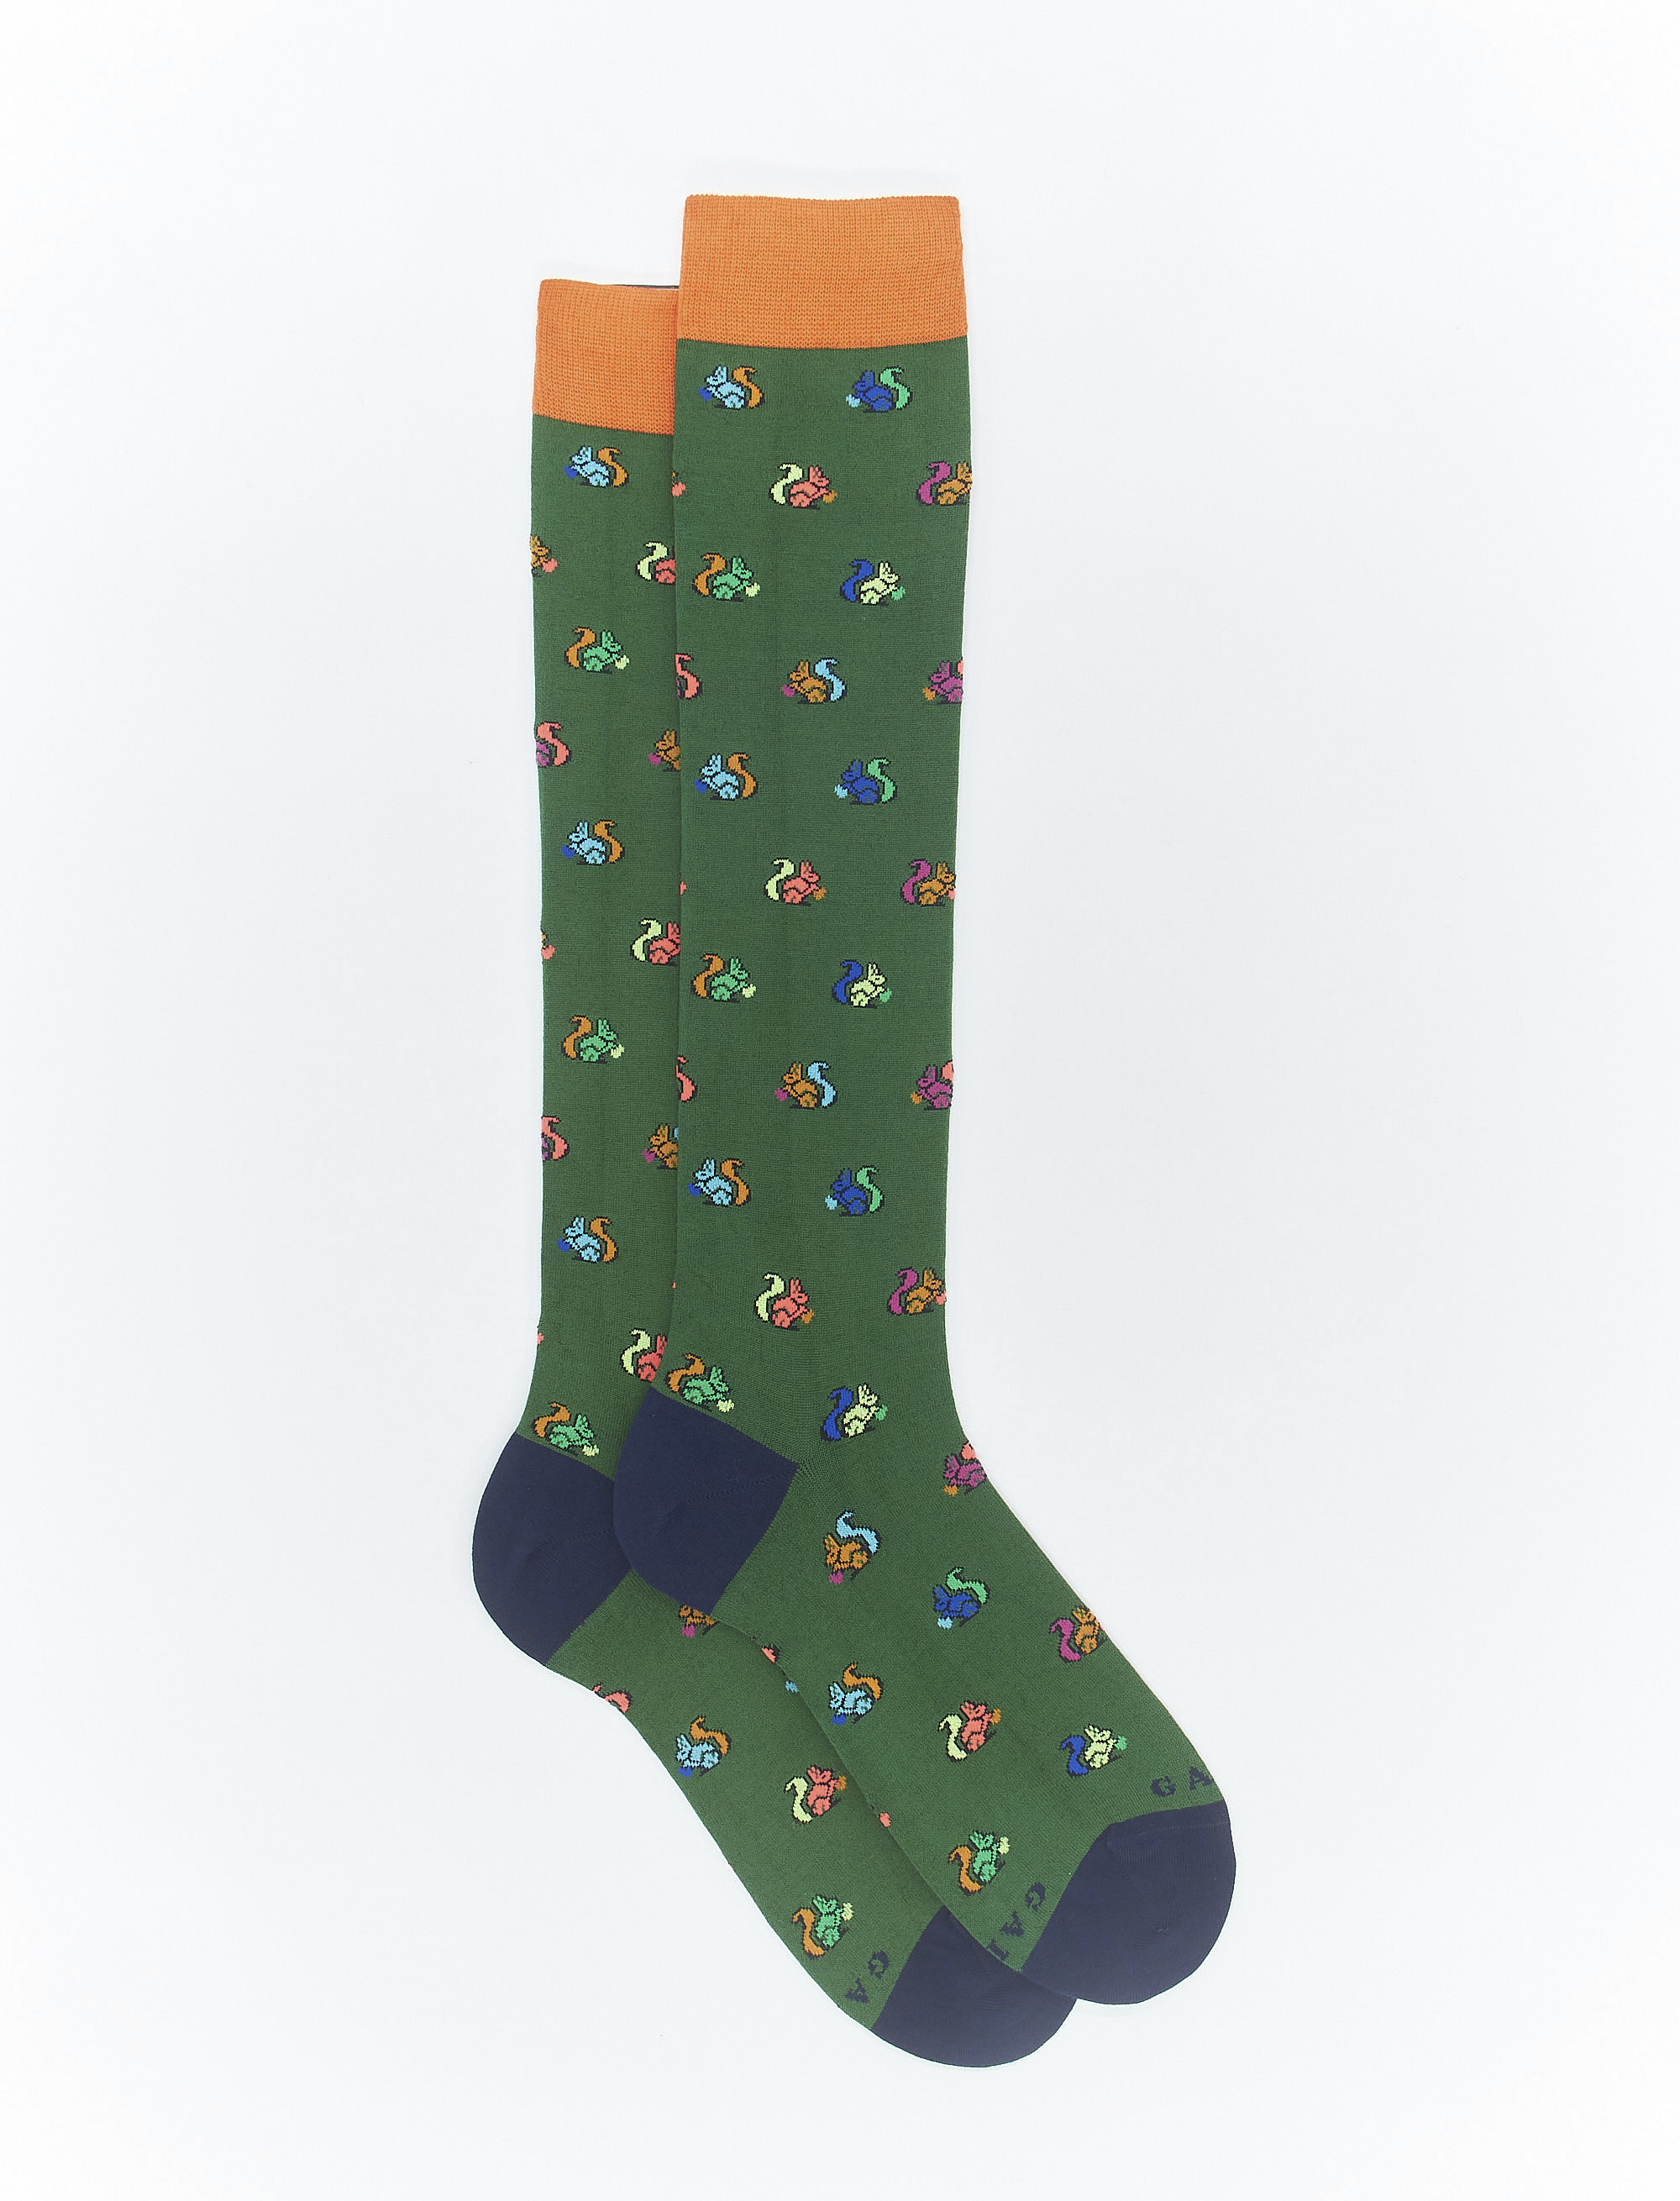 Women's long billiard green light cotton socks with squirrel motif - The FW Edition | Gallo 1927 - Official Online Shop